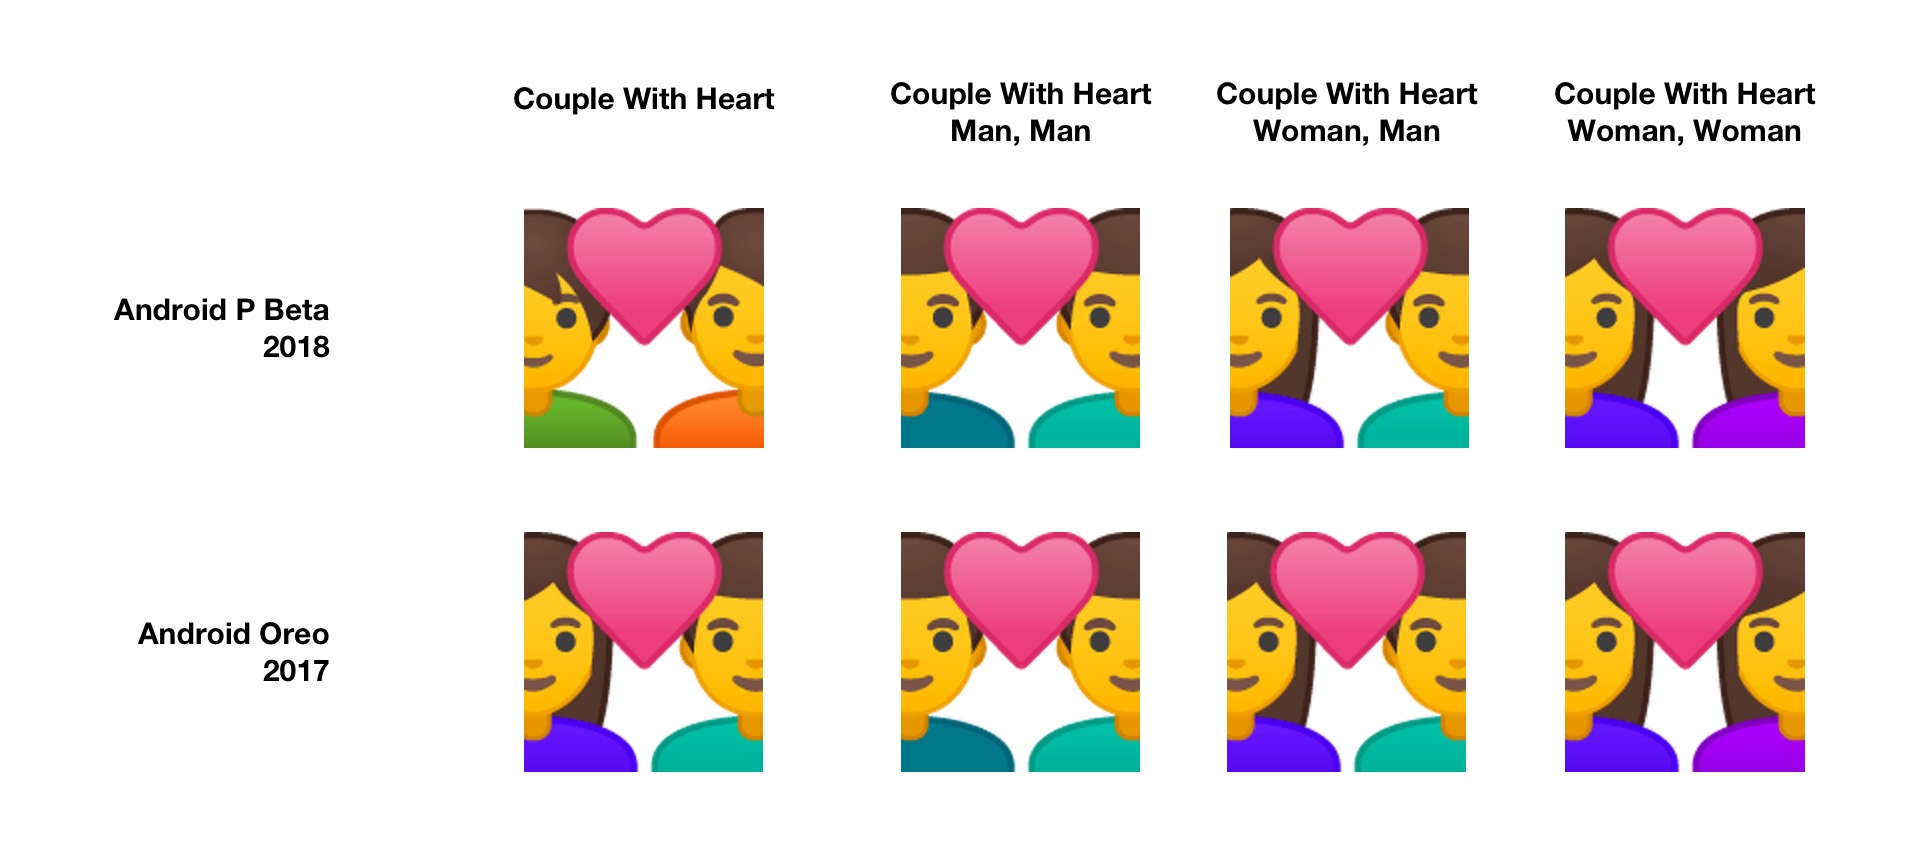 couple-with-heart-android-p-beta-2-emojipedia